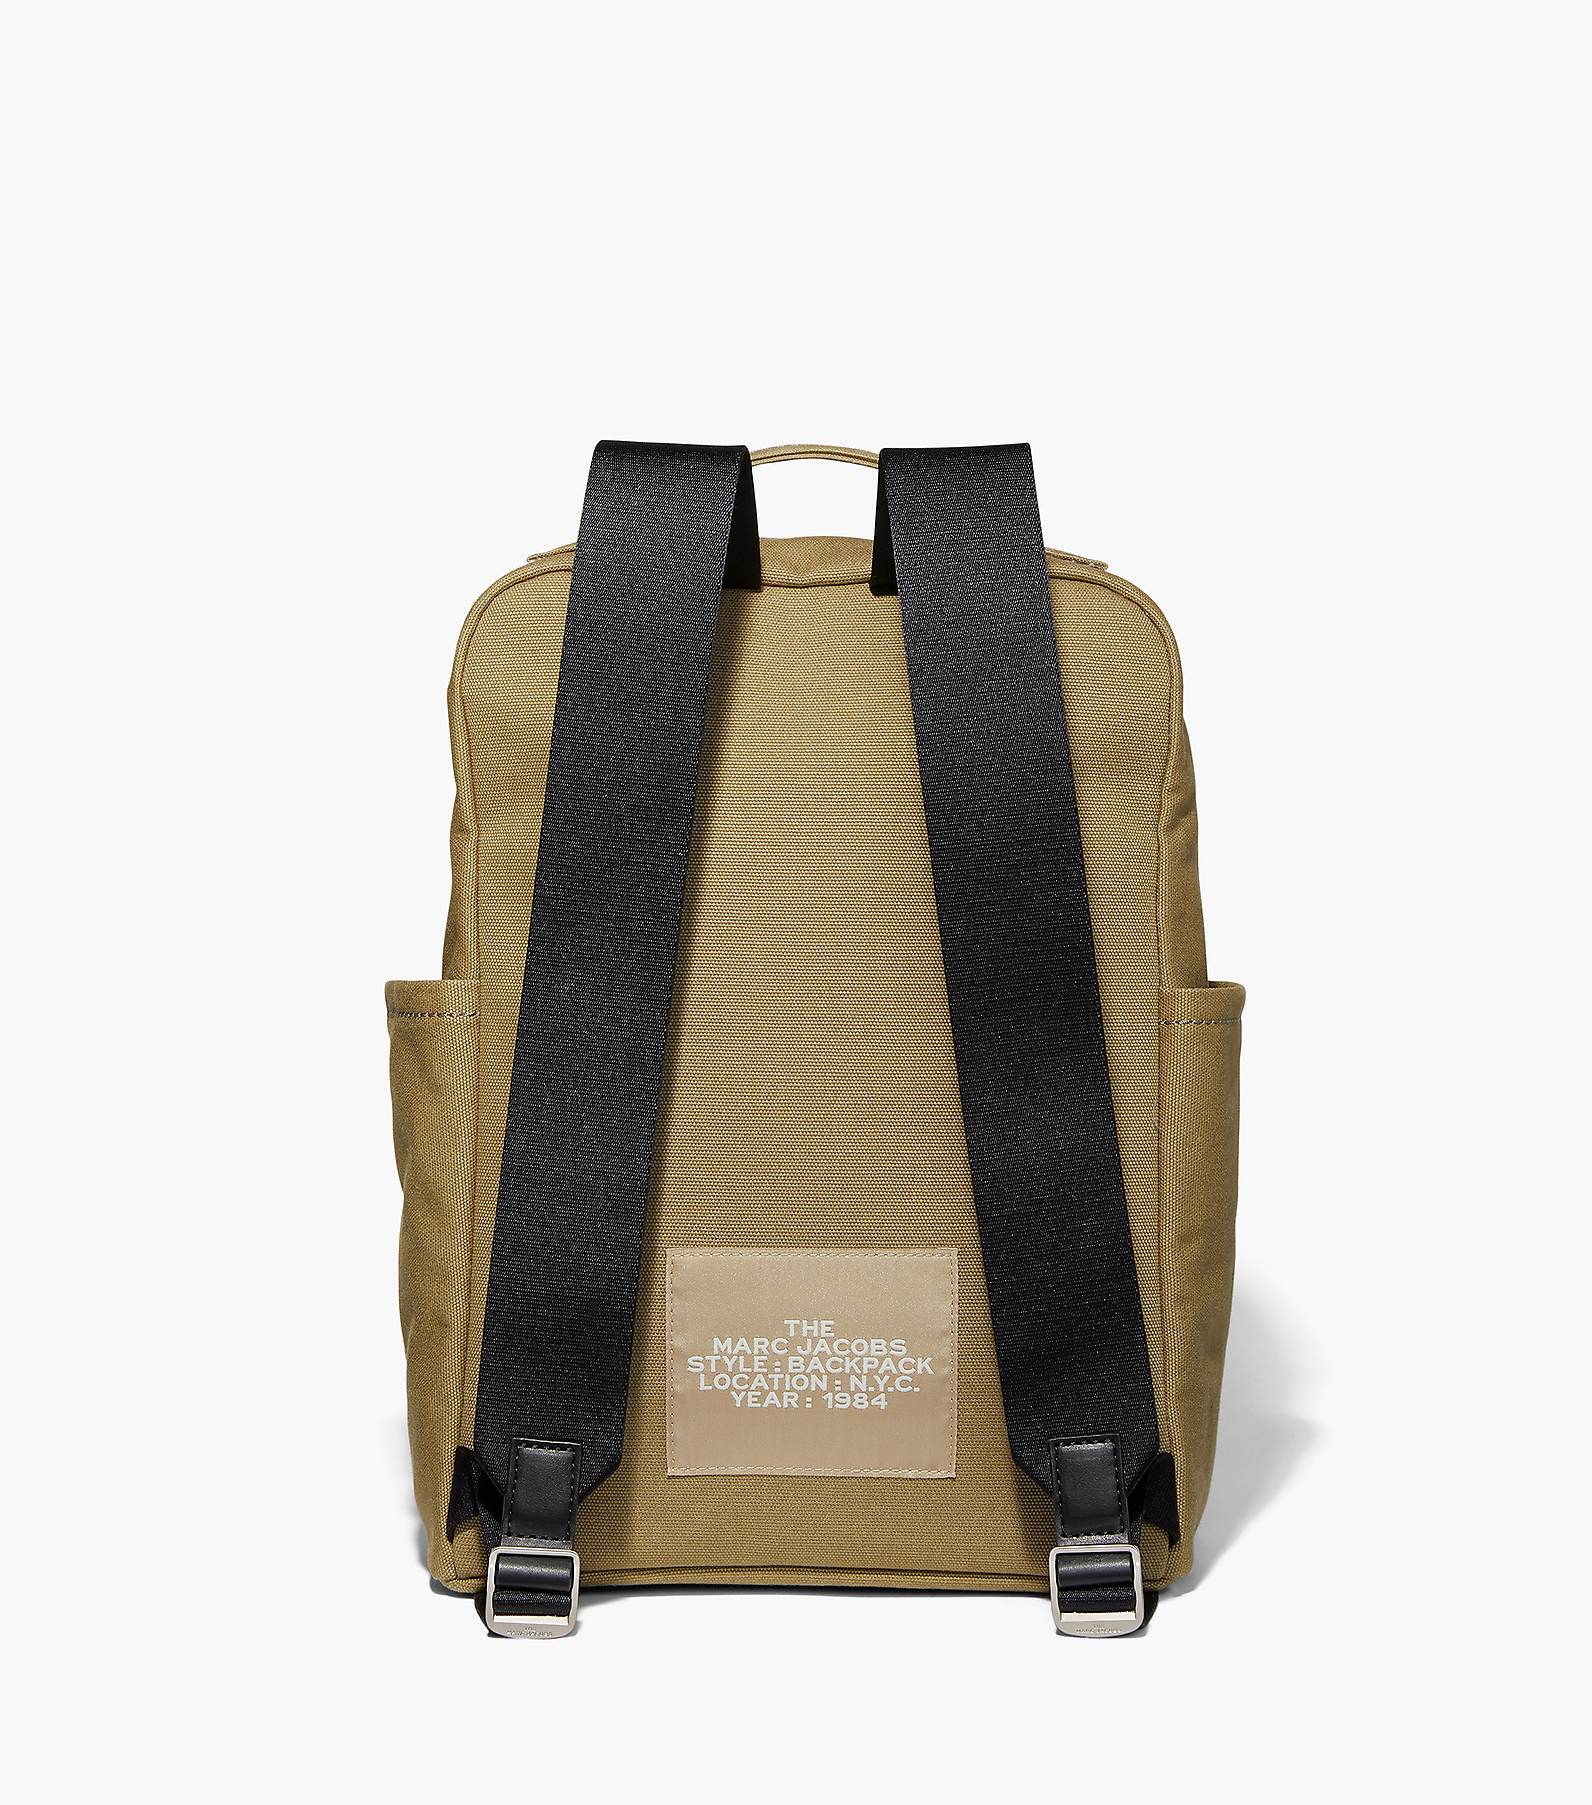 The Backpack | Marc Jacobs | Official Site